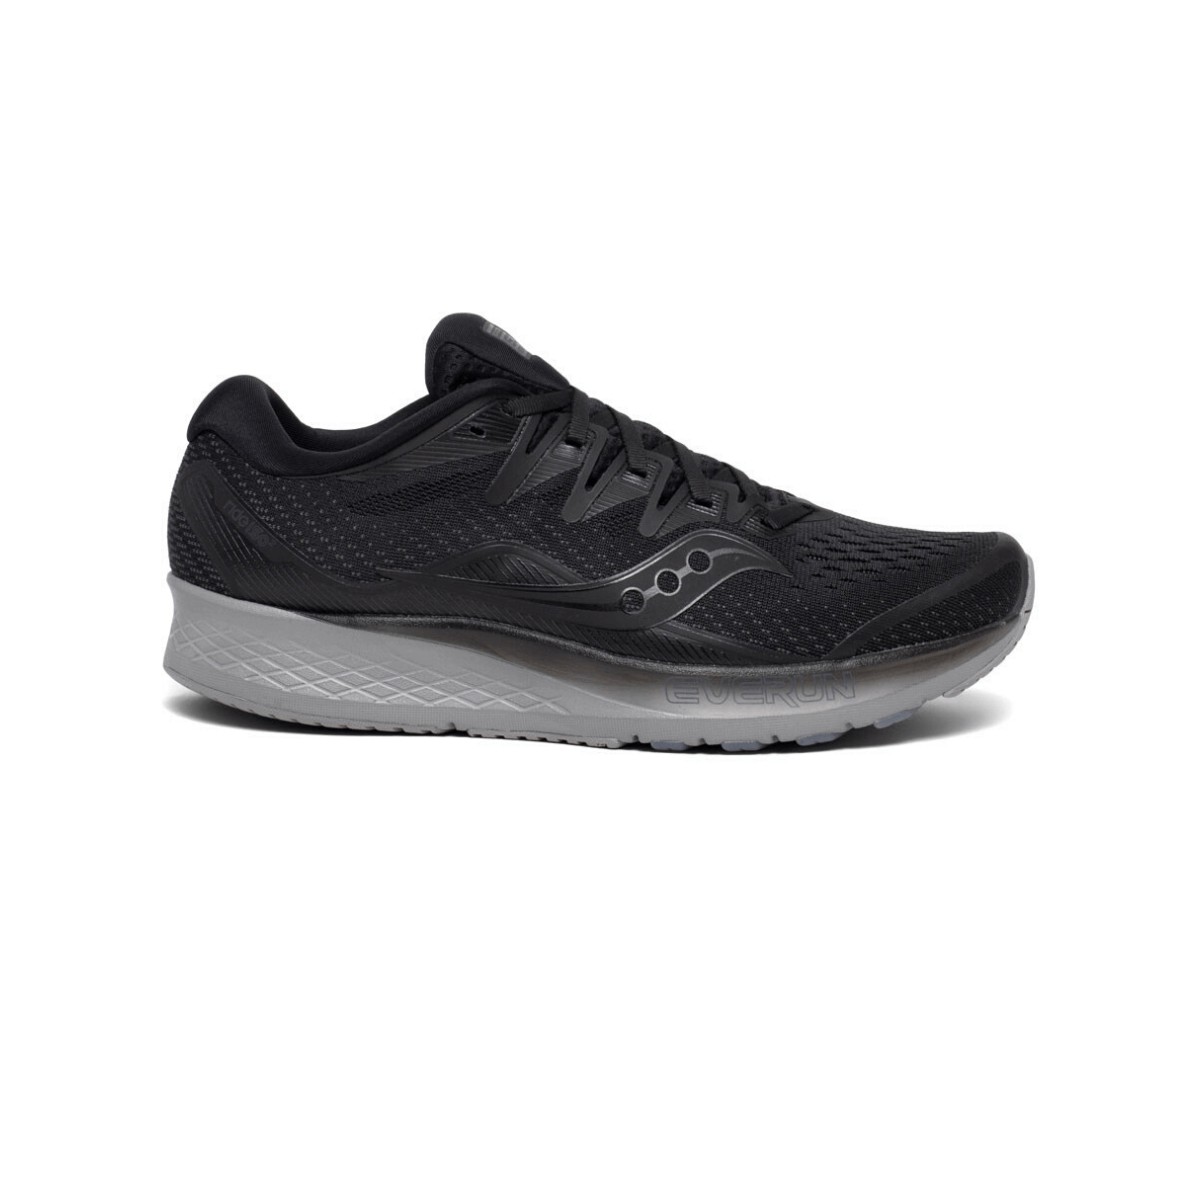 Saucony Ride ISO 2 black SS20 Men's Running Shoes